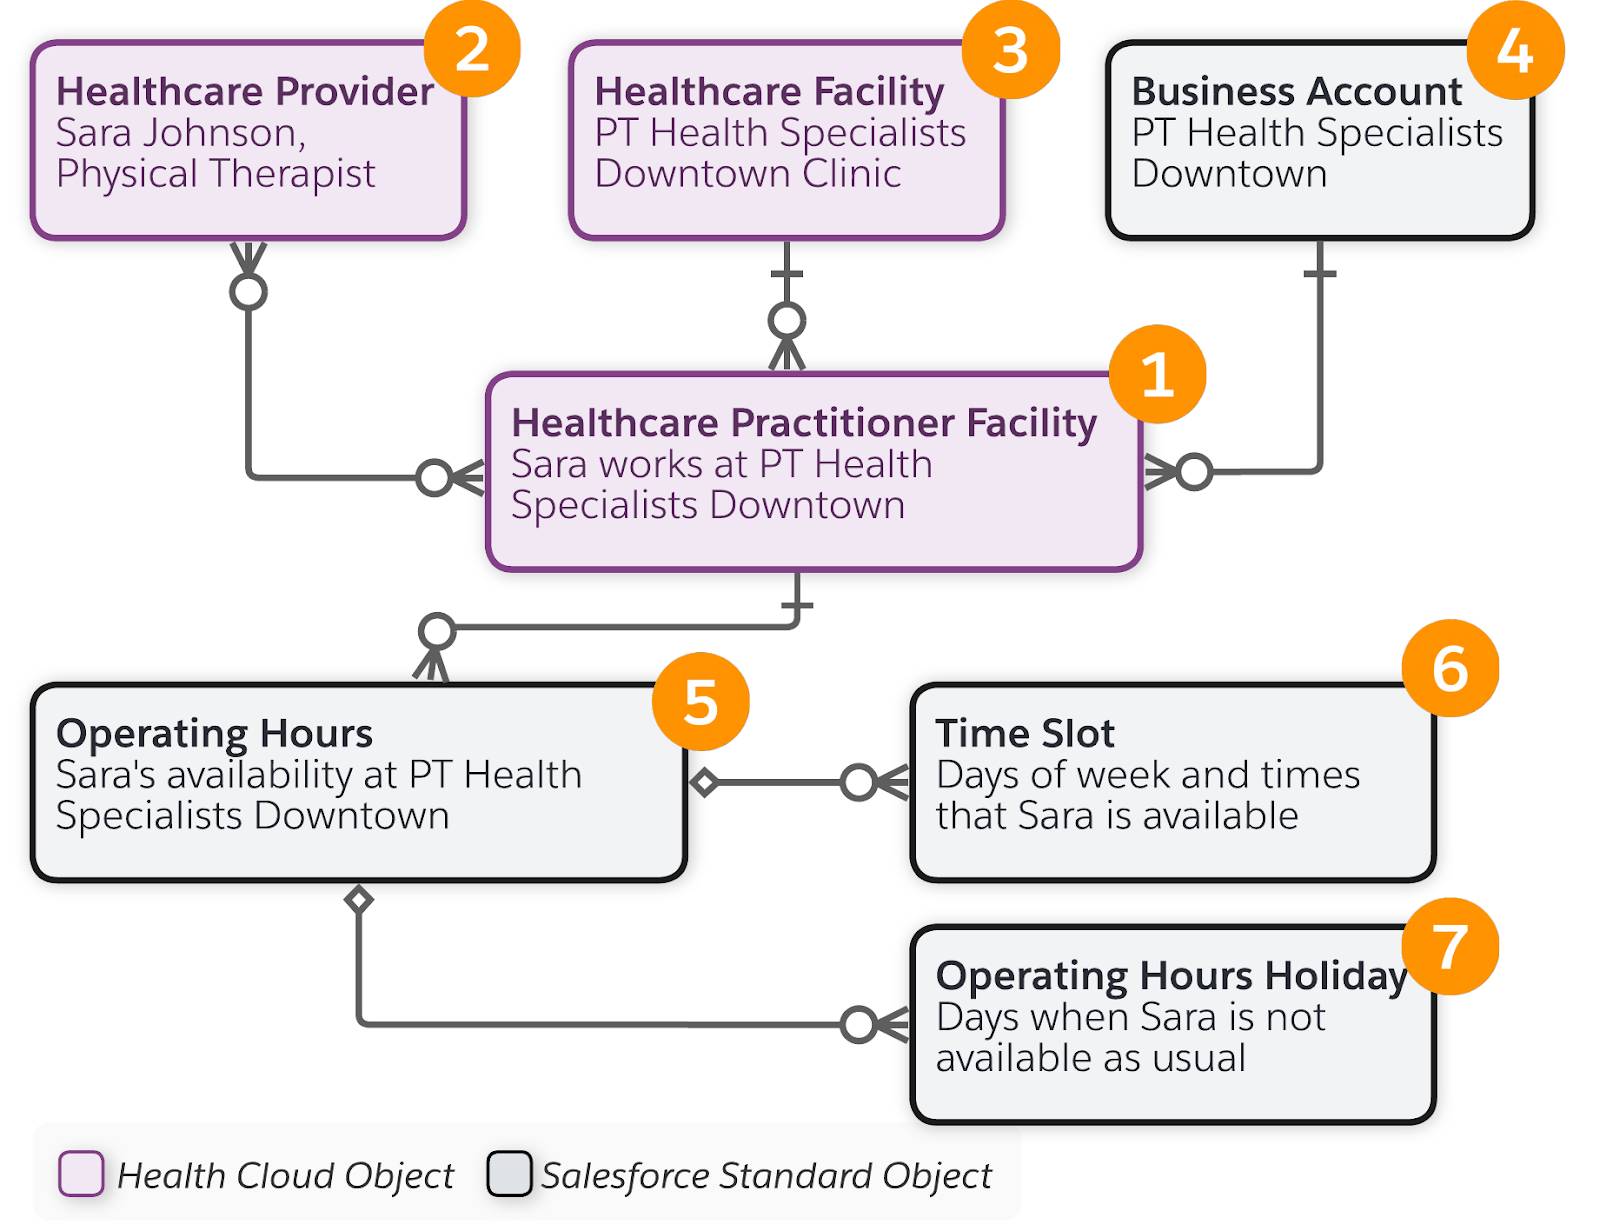 Cloud healthcare and the data state of play